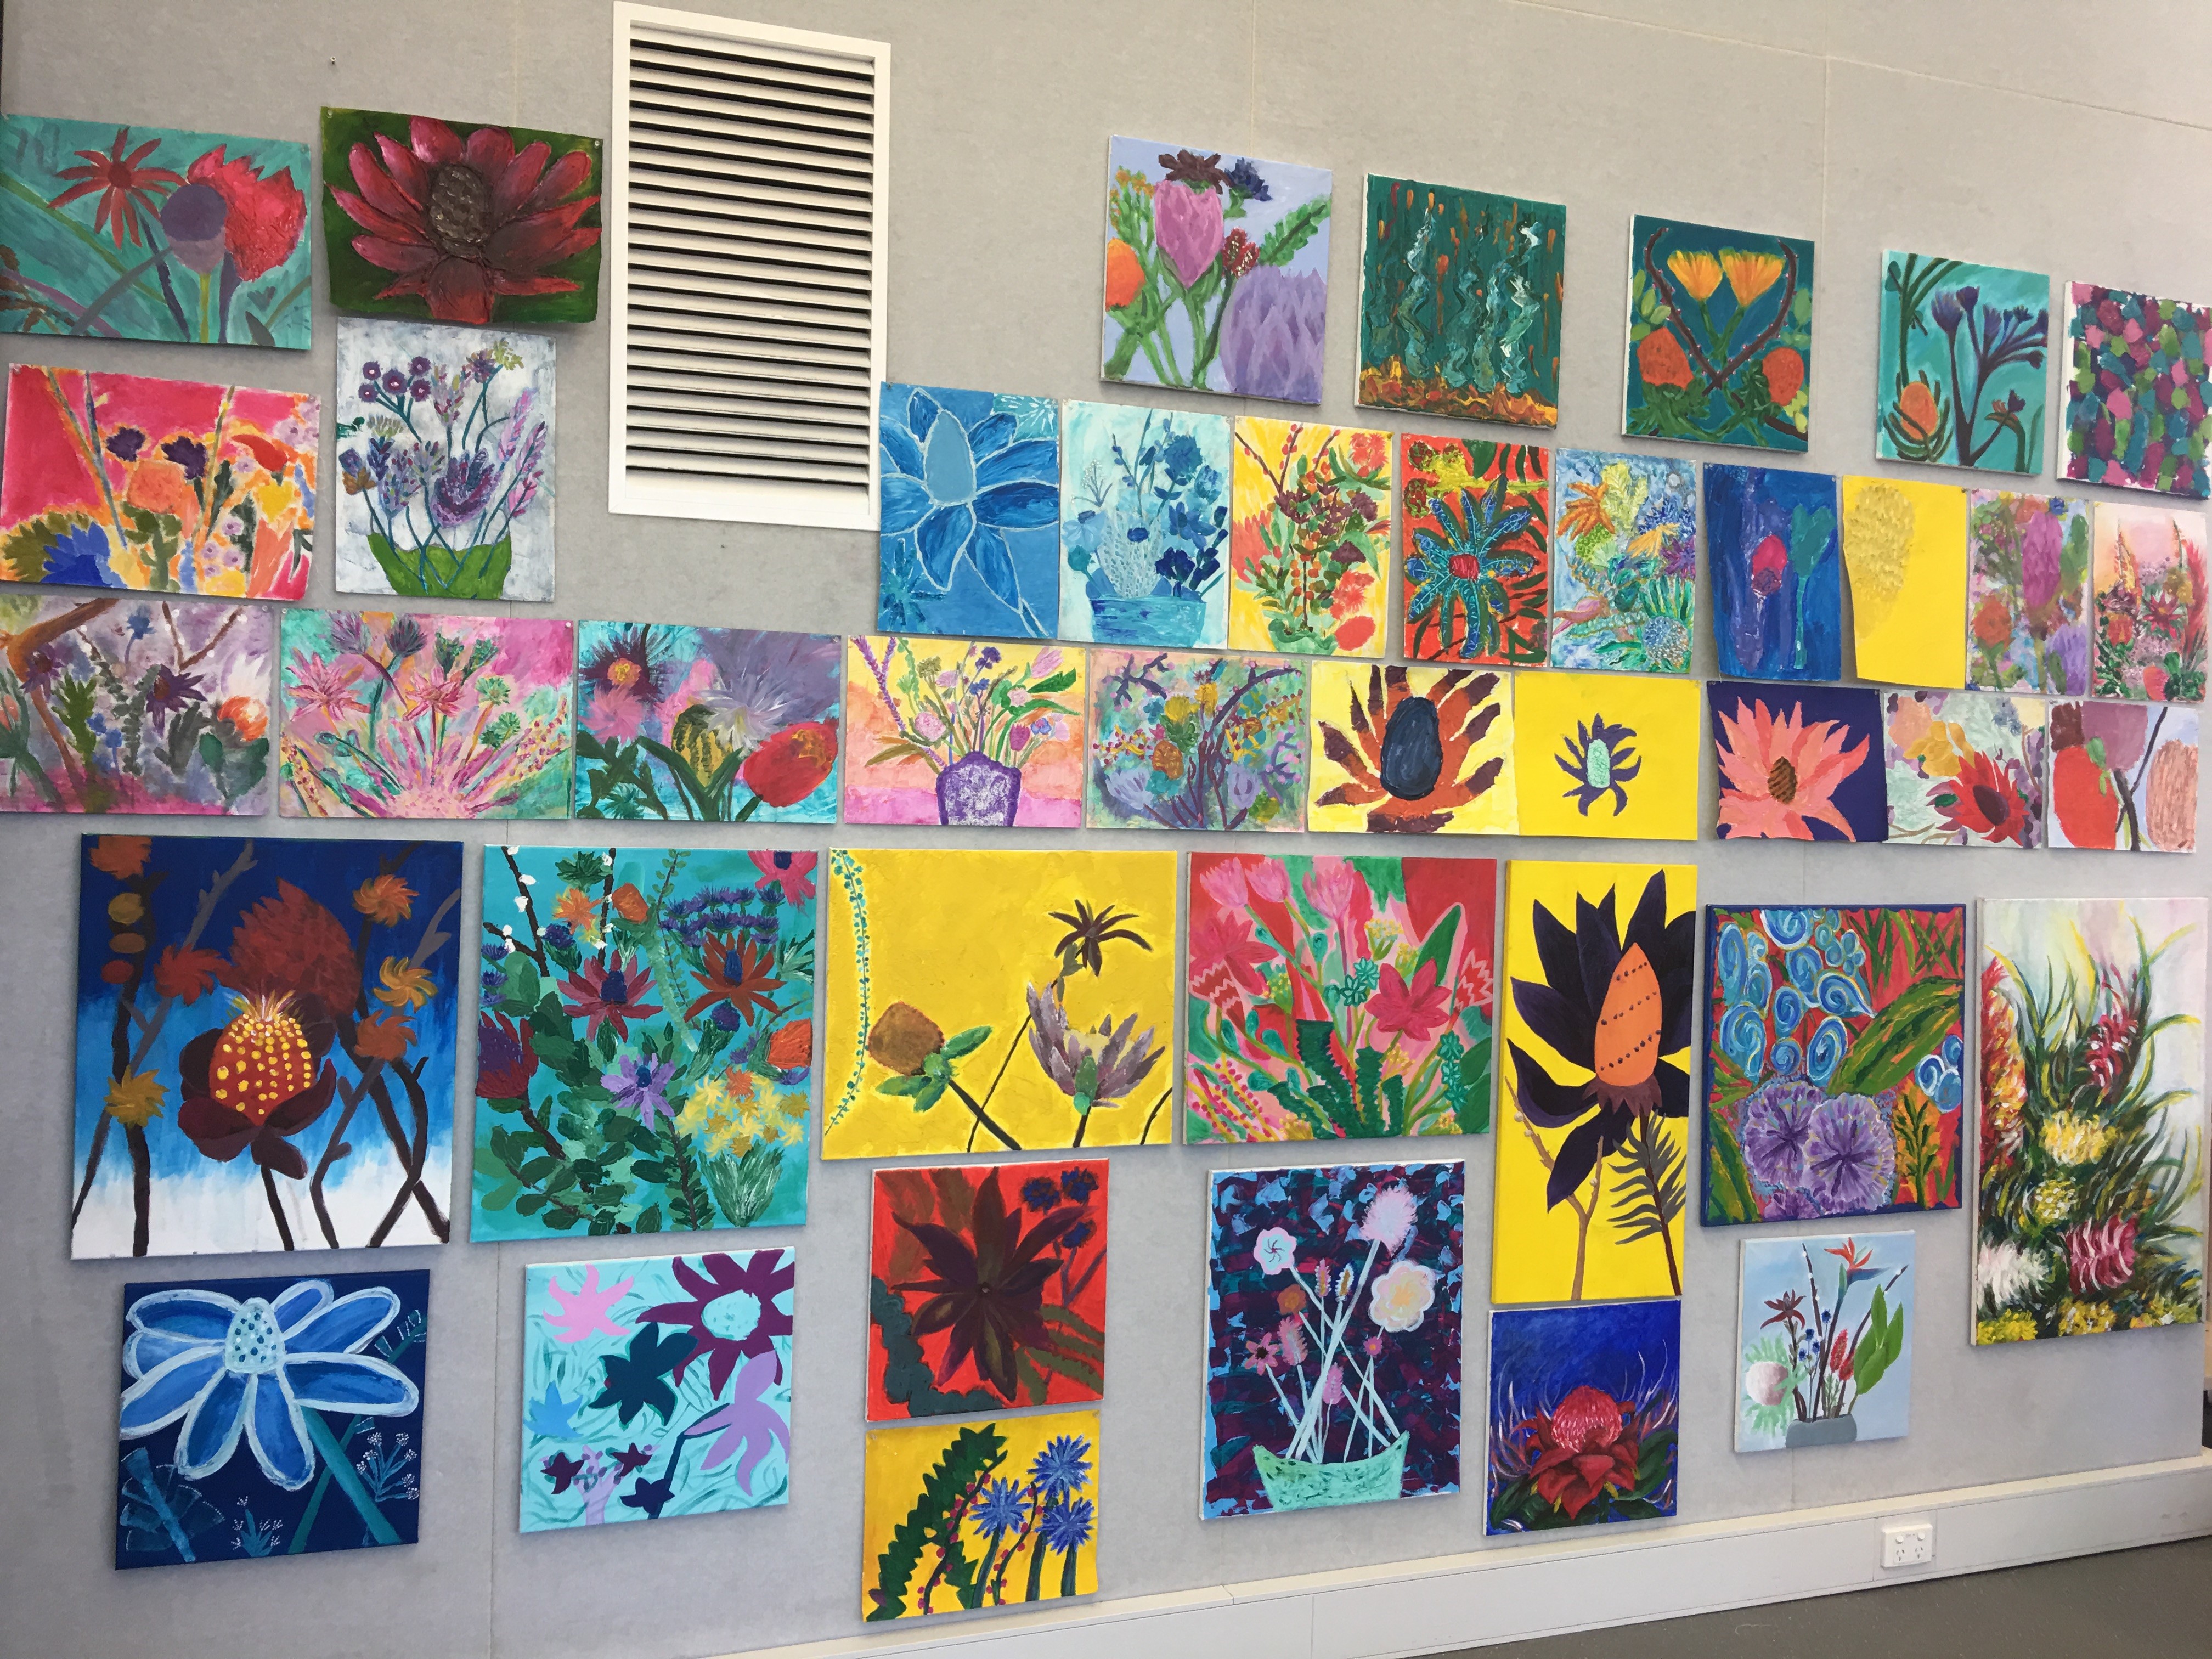 Student artworks on display on a wall